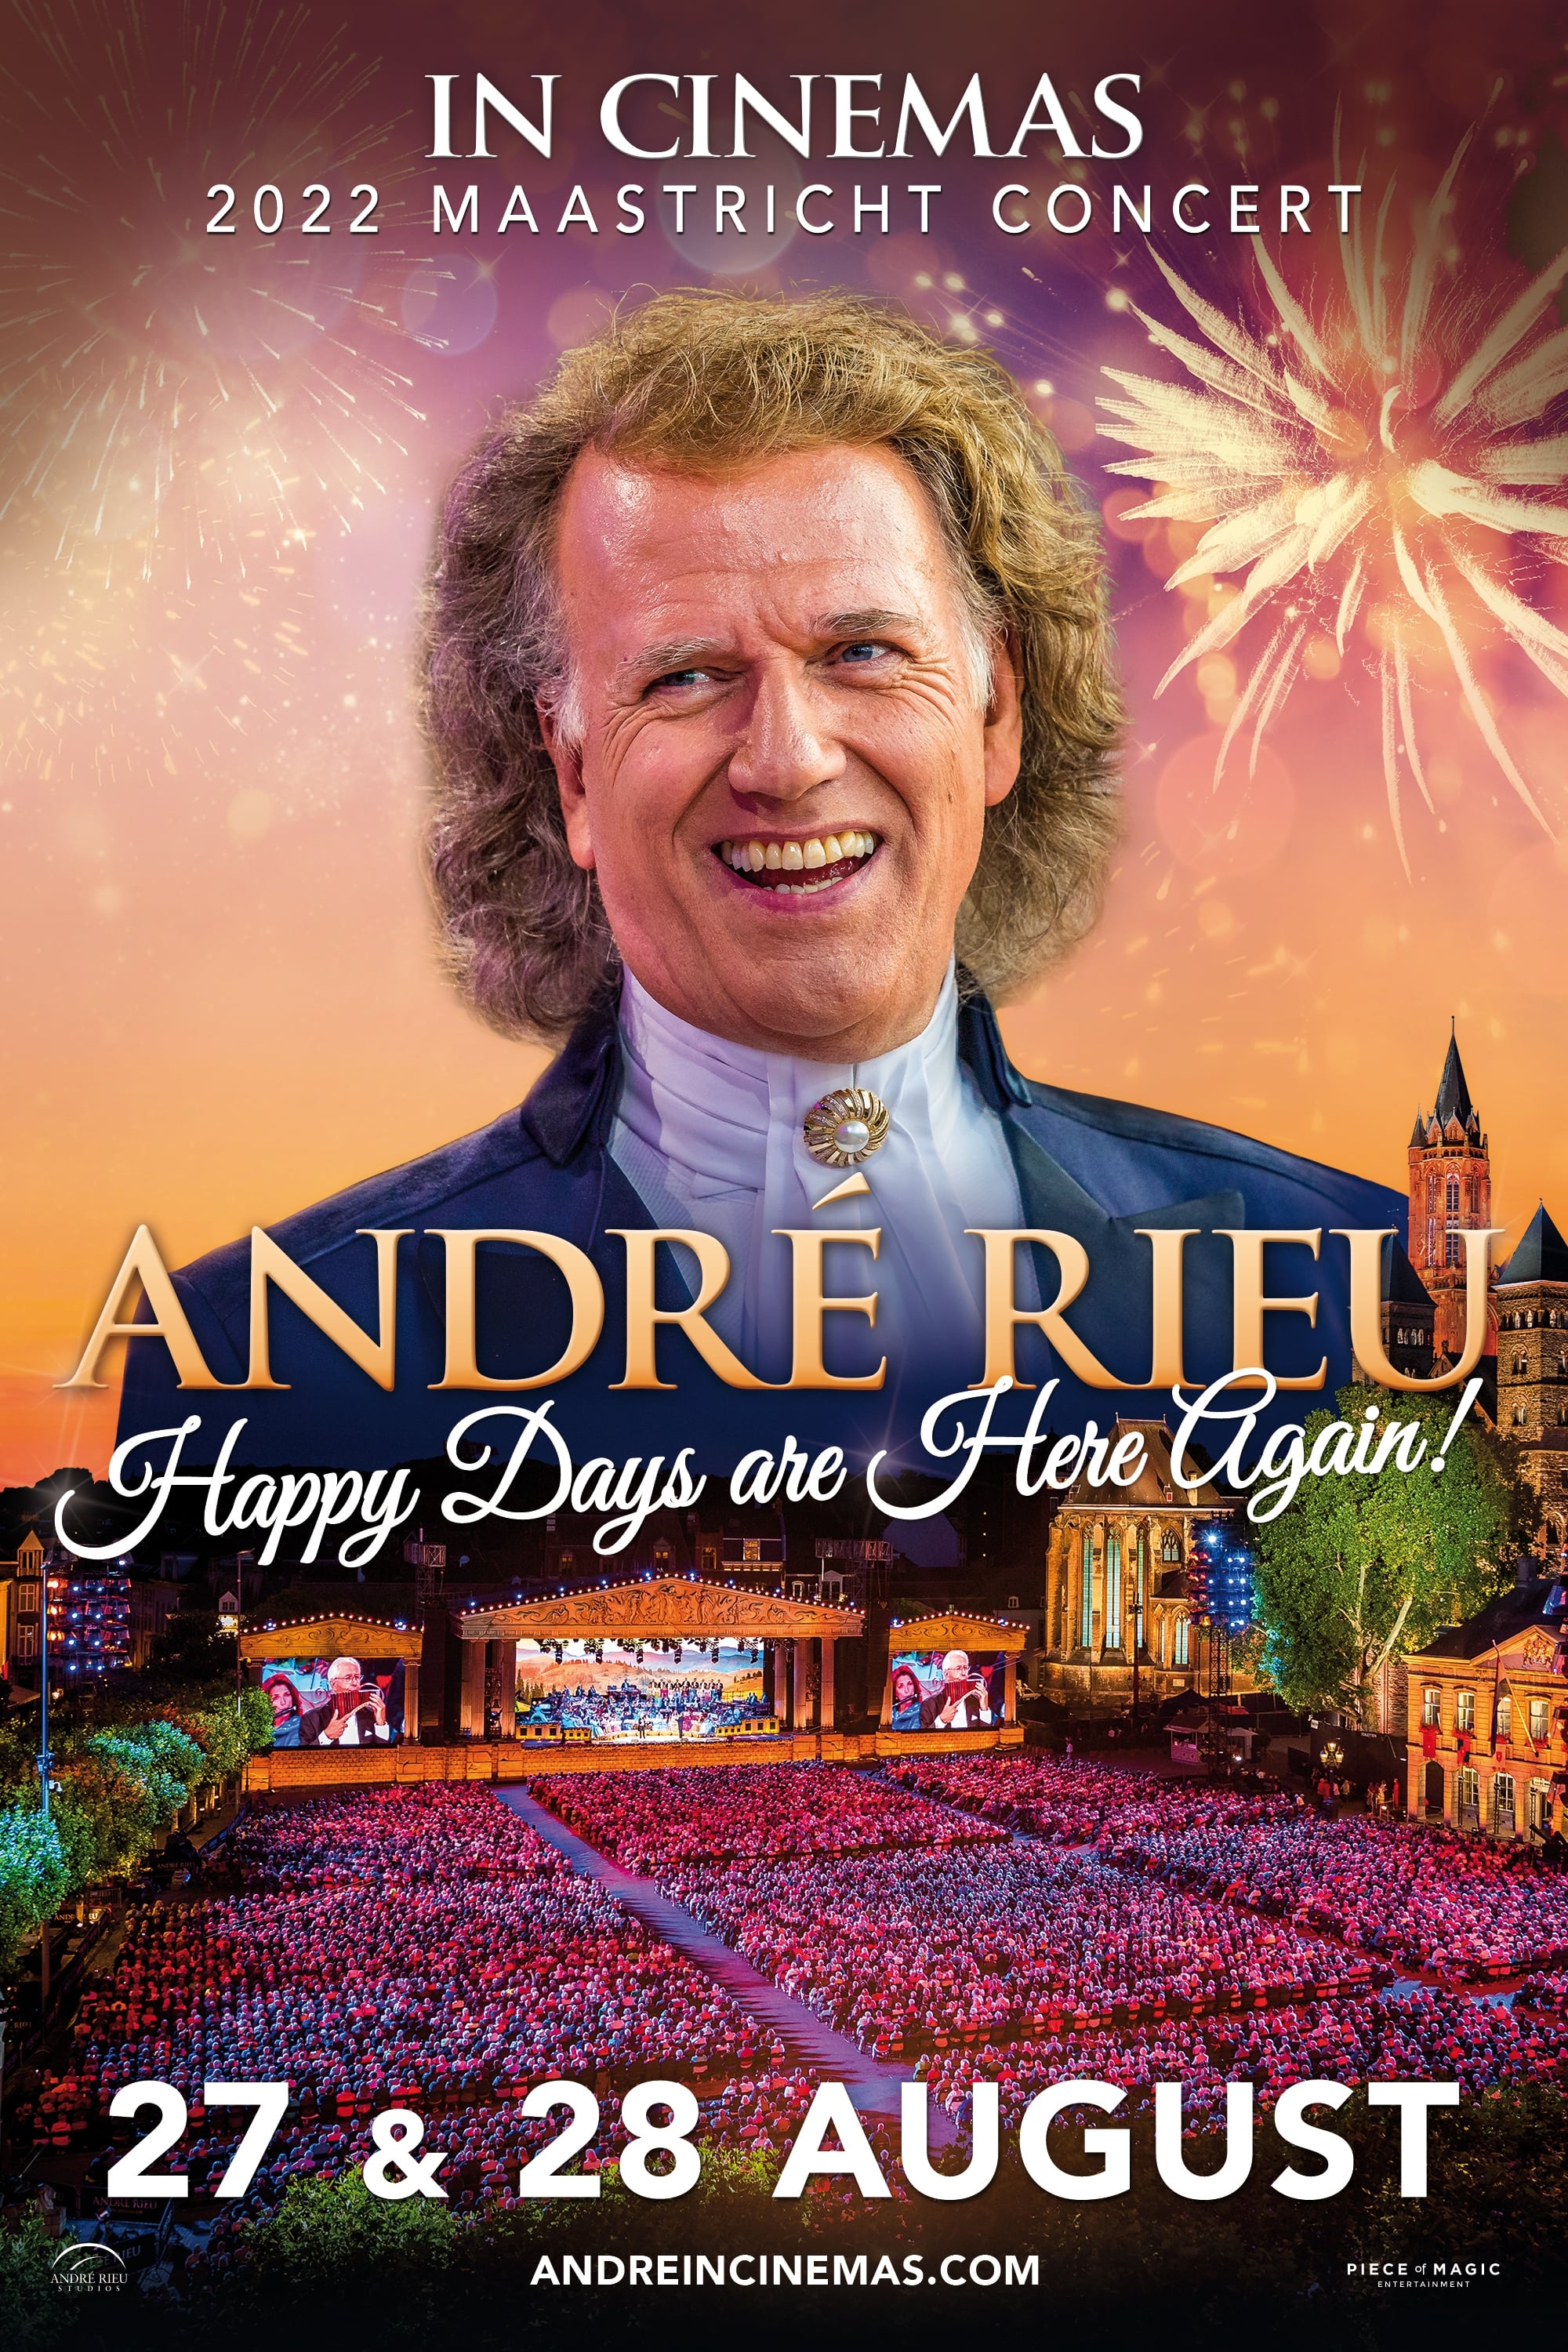 André Rieu 2022 Maastricht Concert - Happy Days are Here Again!